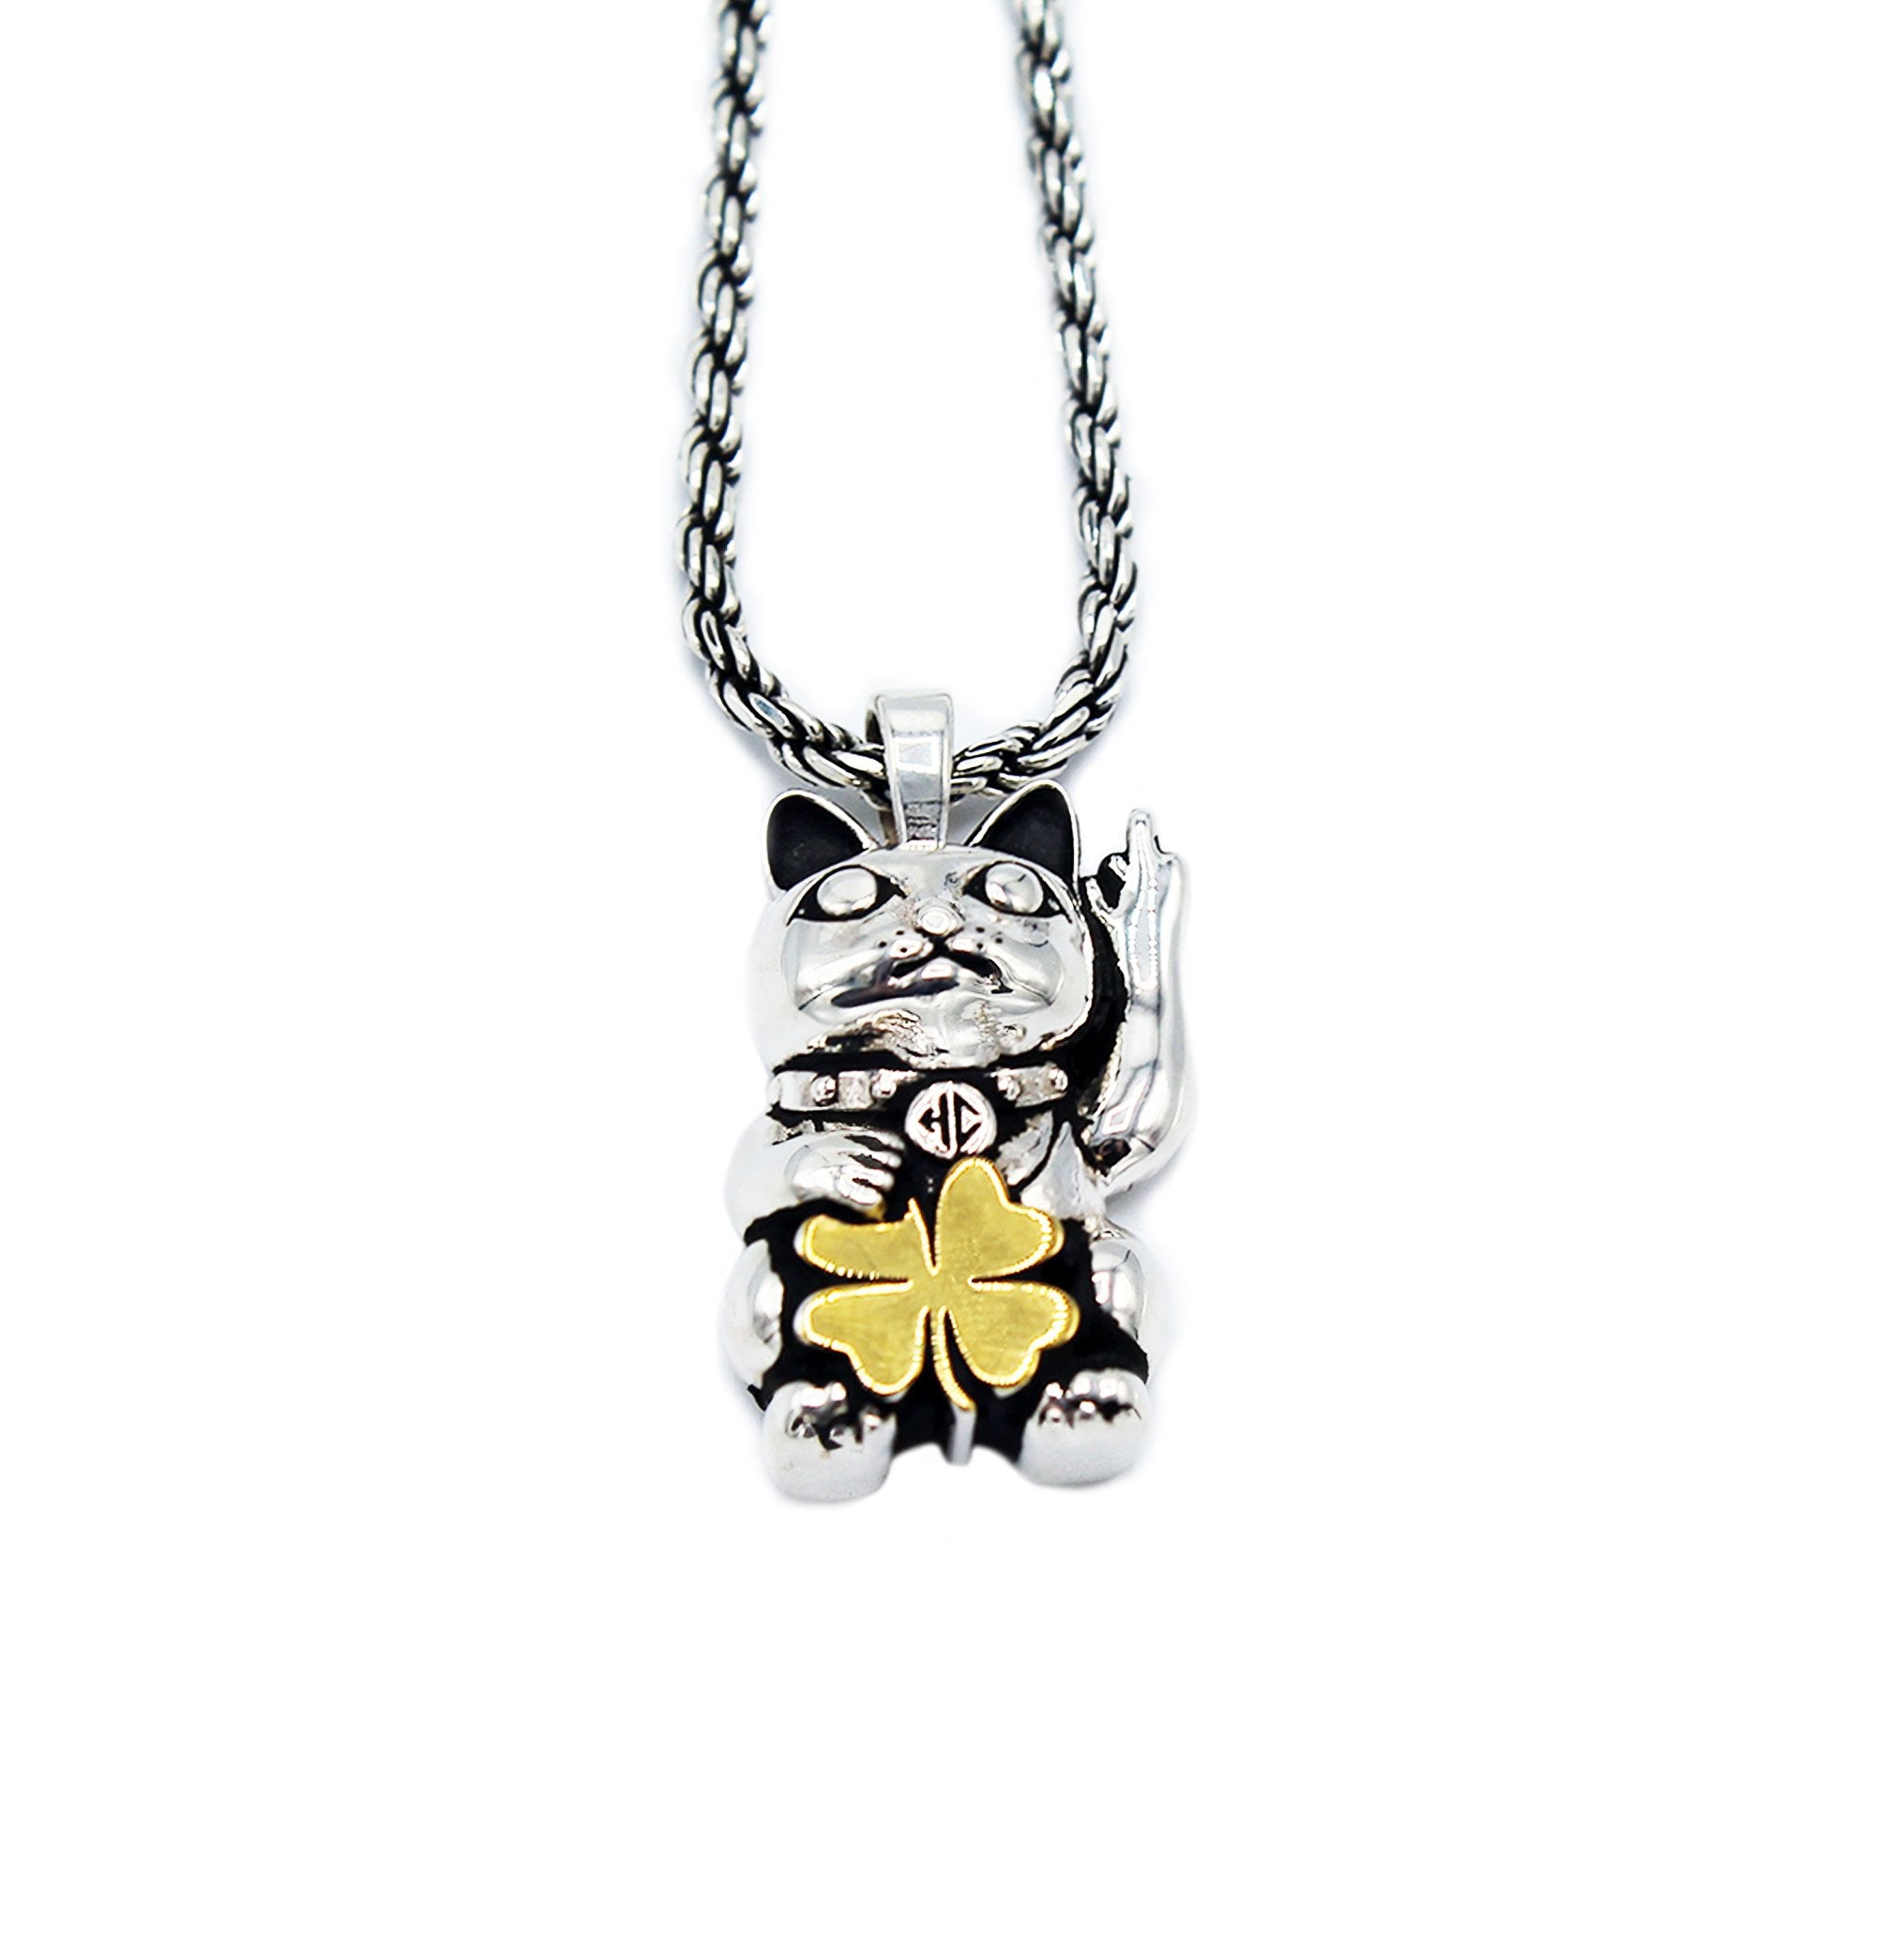 two tone unlucky cat necklace with cat having middle finger and holding gold clover